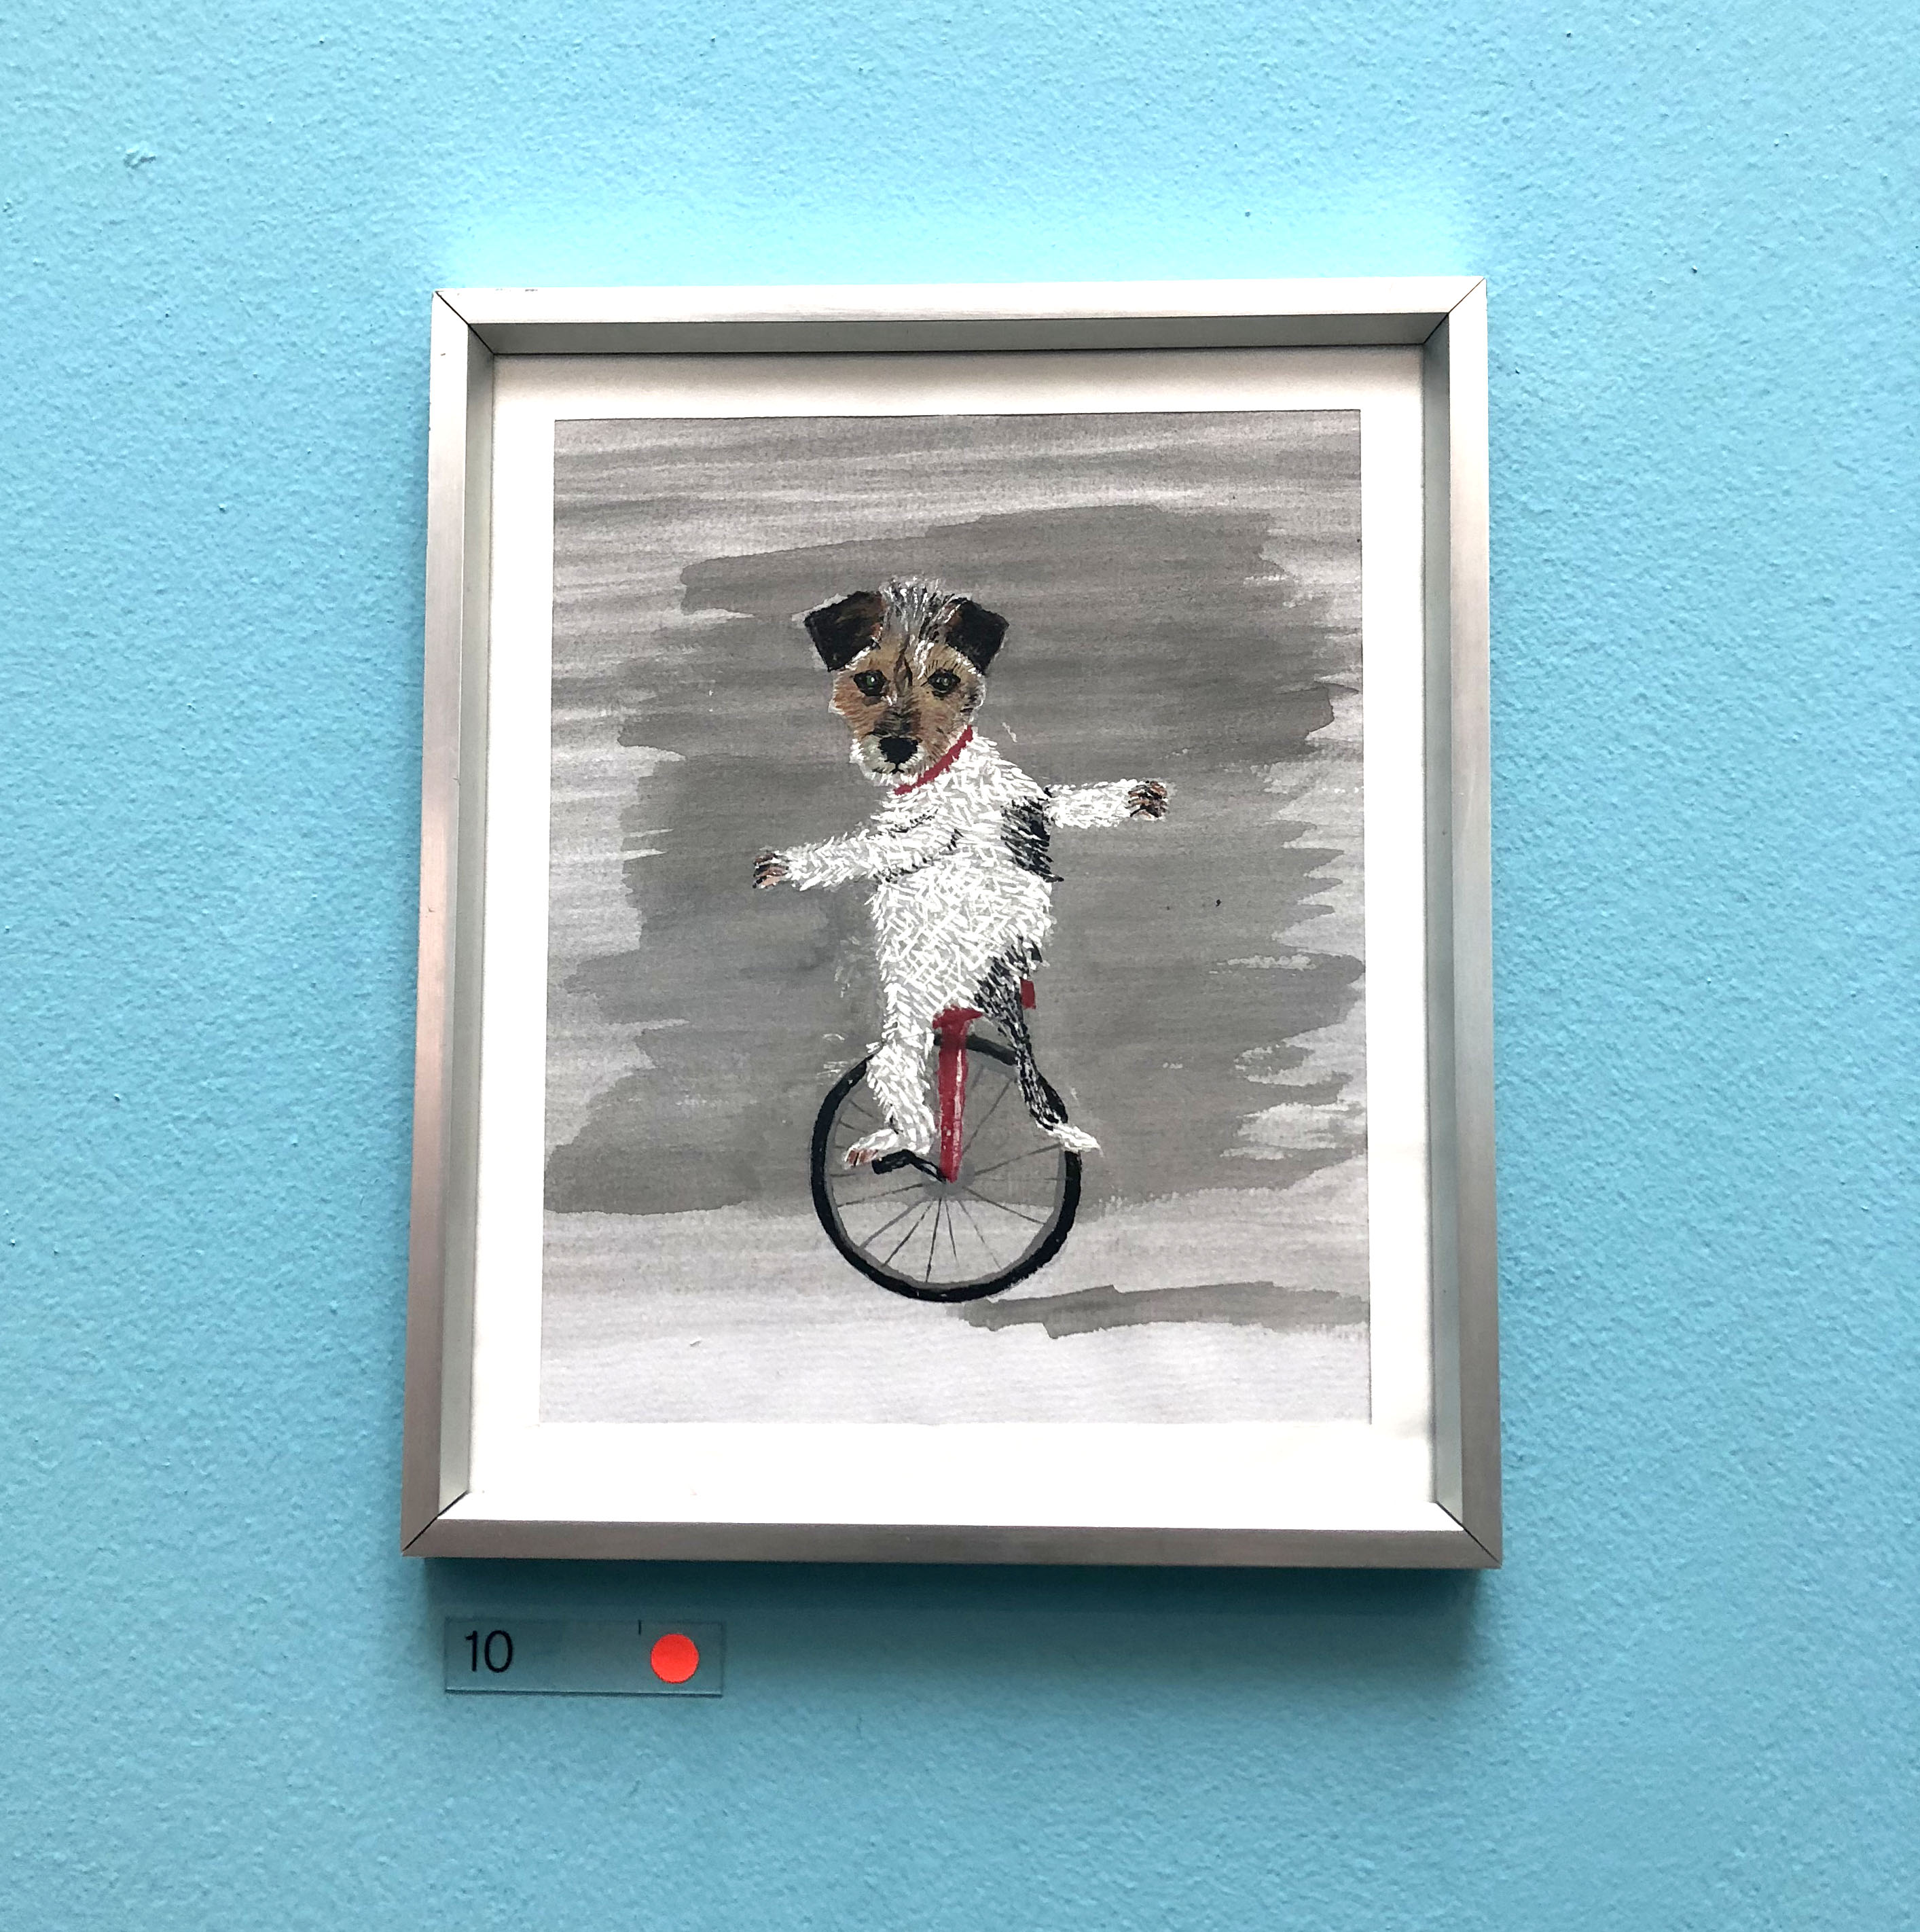 Royal Academy Summer Exhibition 2018. Peggy by Les Deacon